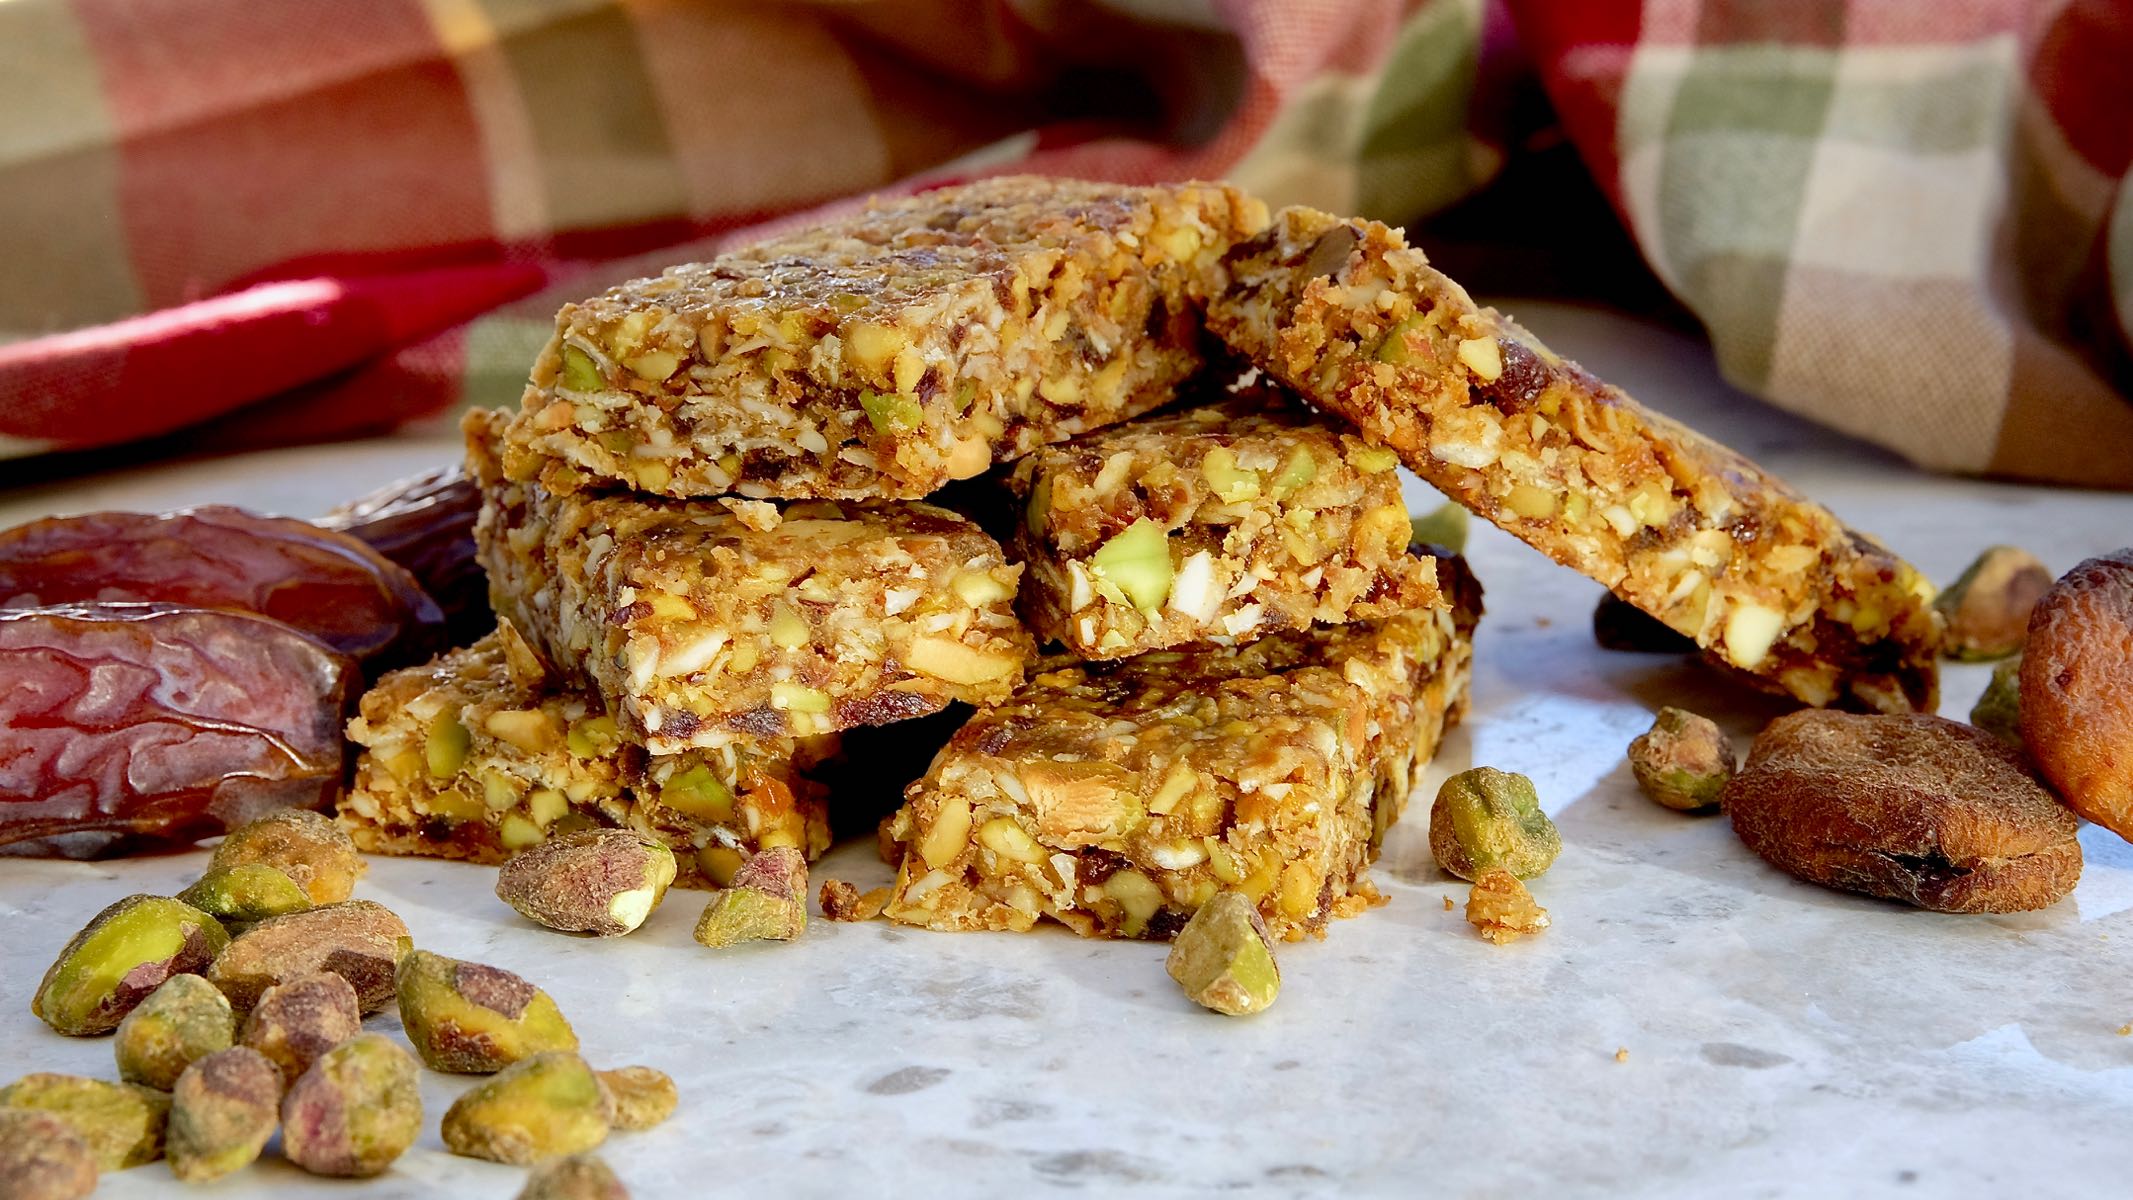 Pistachio-Apricot Granola Bars on white marble with burgundy and green plaid linen in background